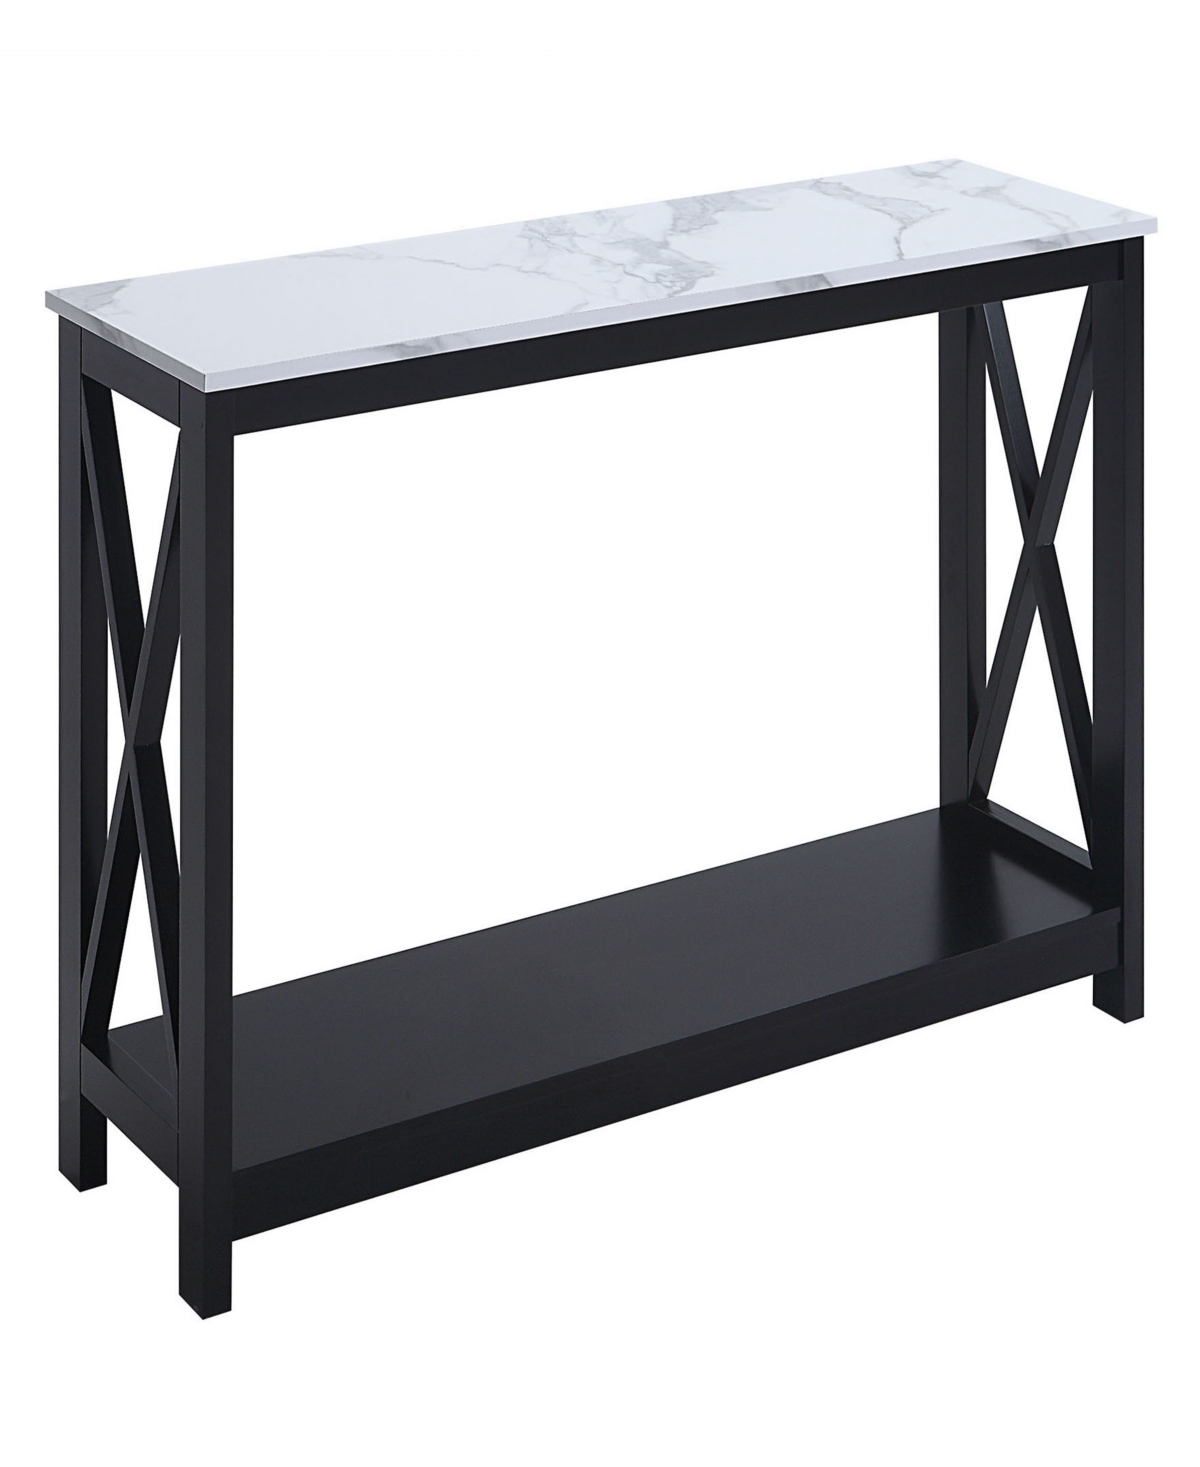 Convenience Concepts 39.5" Mdf Oxford Console Table With Shelf In White Faux Marble,black